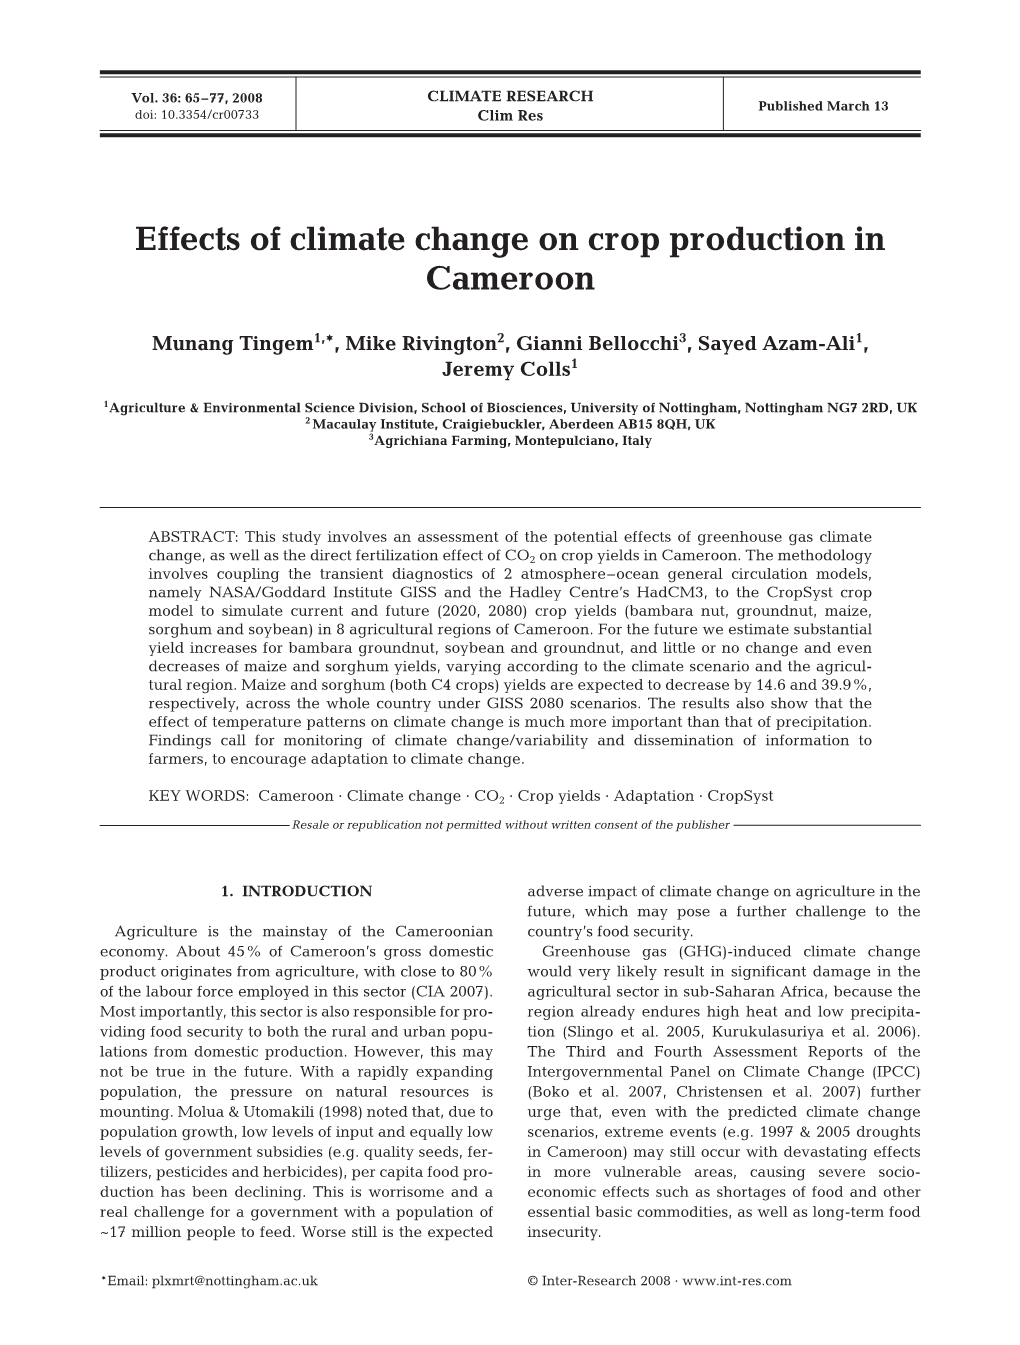 Effects of Climate Change on Crop Production in Cameroon